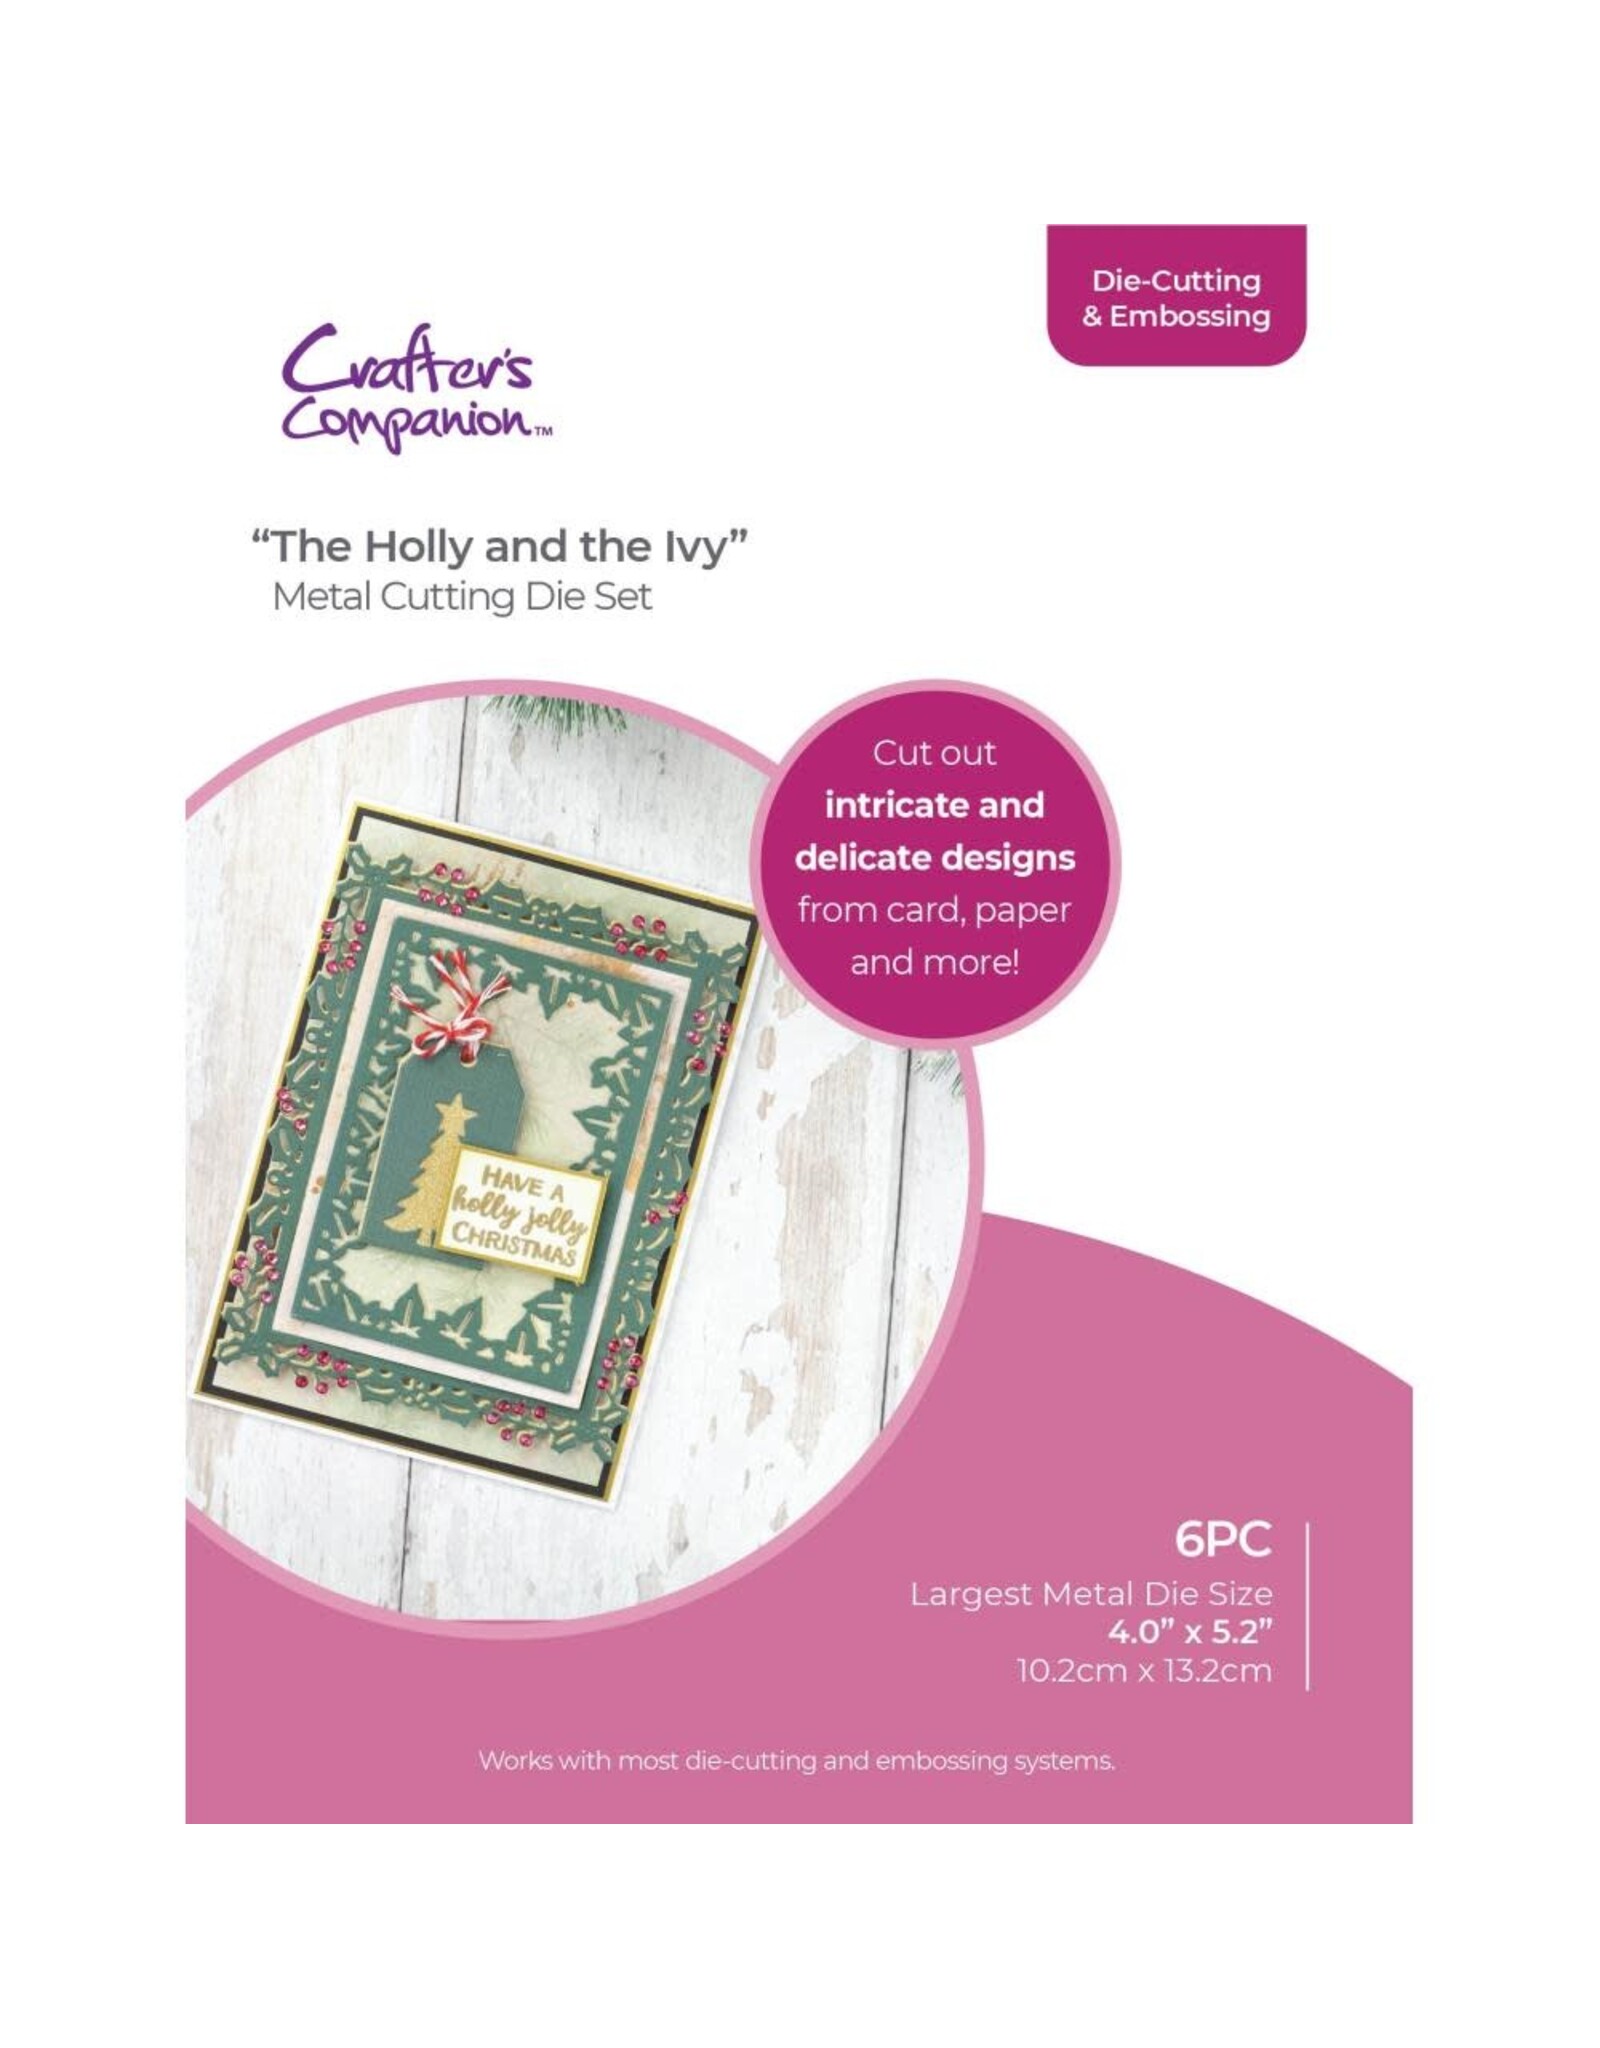 CRAFTERS COMPANION CRAFTER'S COMPANION THE HOLLY AND THE IVY DIE-CUTTING & EMBOSSING DIE SET